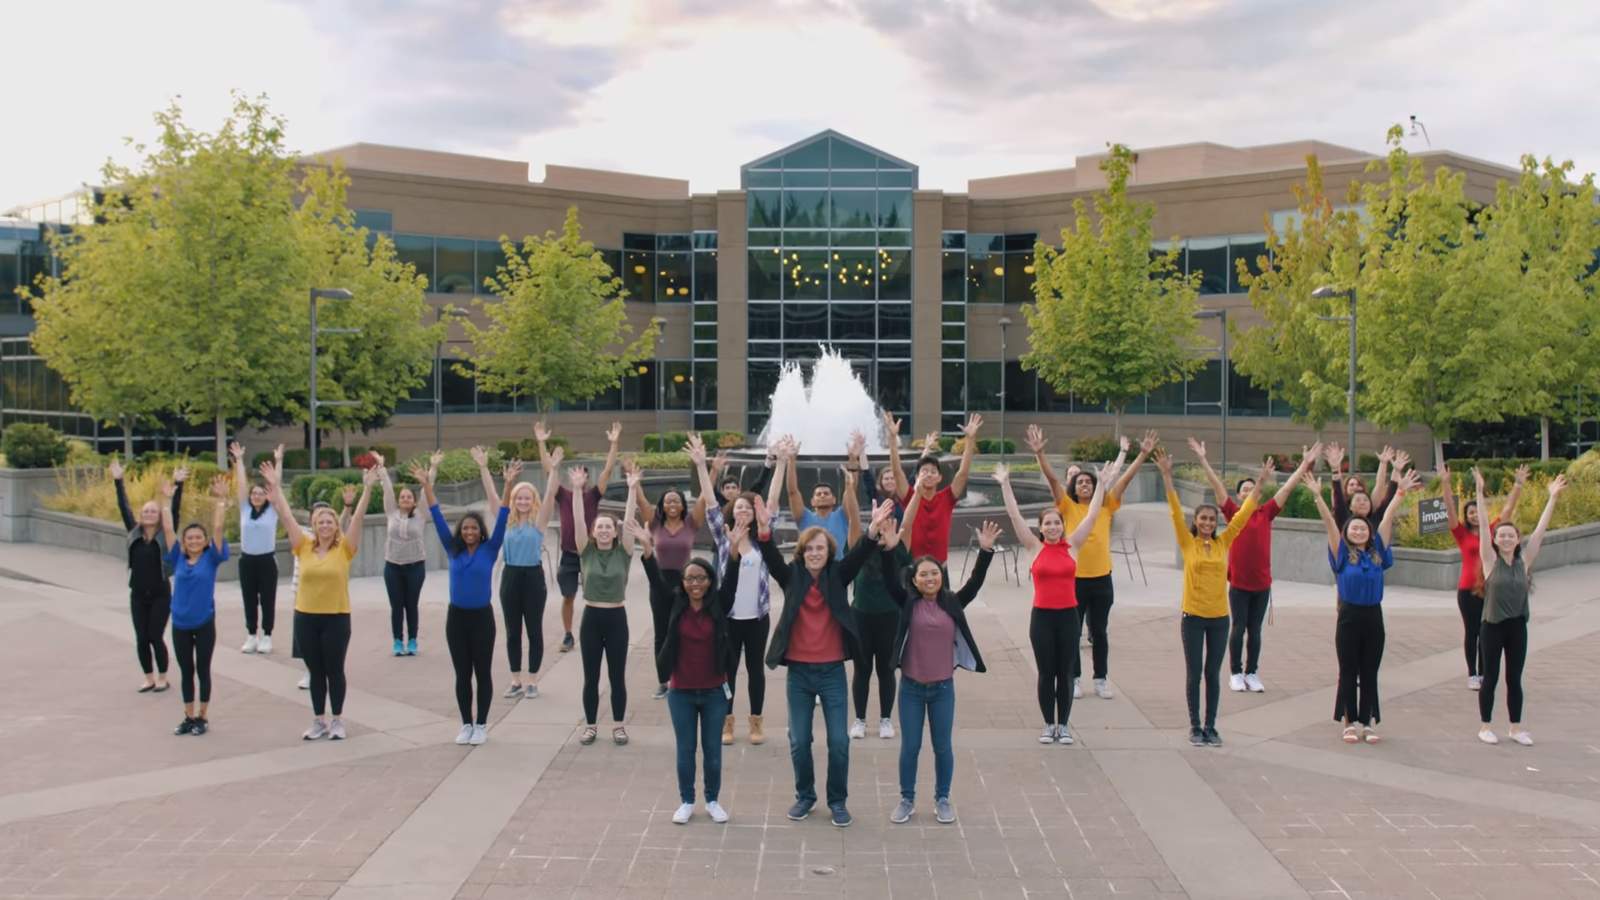 Microsoft's Interns Made a Musical, And It's Only a Little Weird